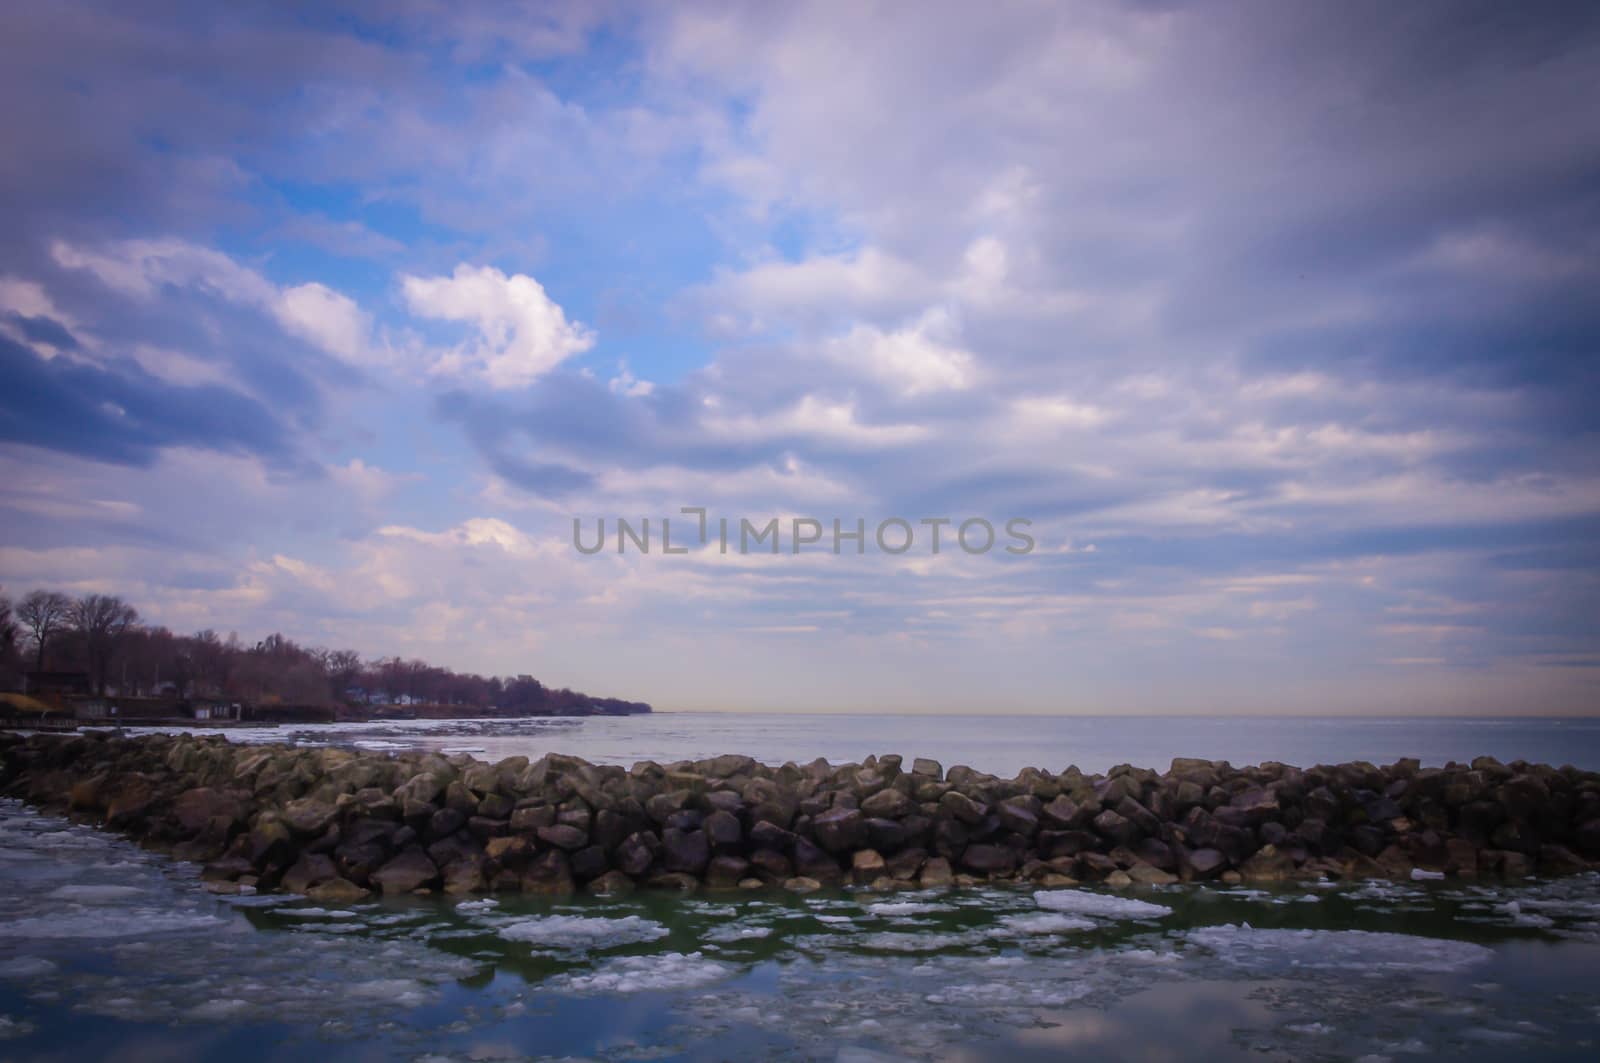 Breakwall and Ice Floes on Lake Erie by krisblackphotography